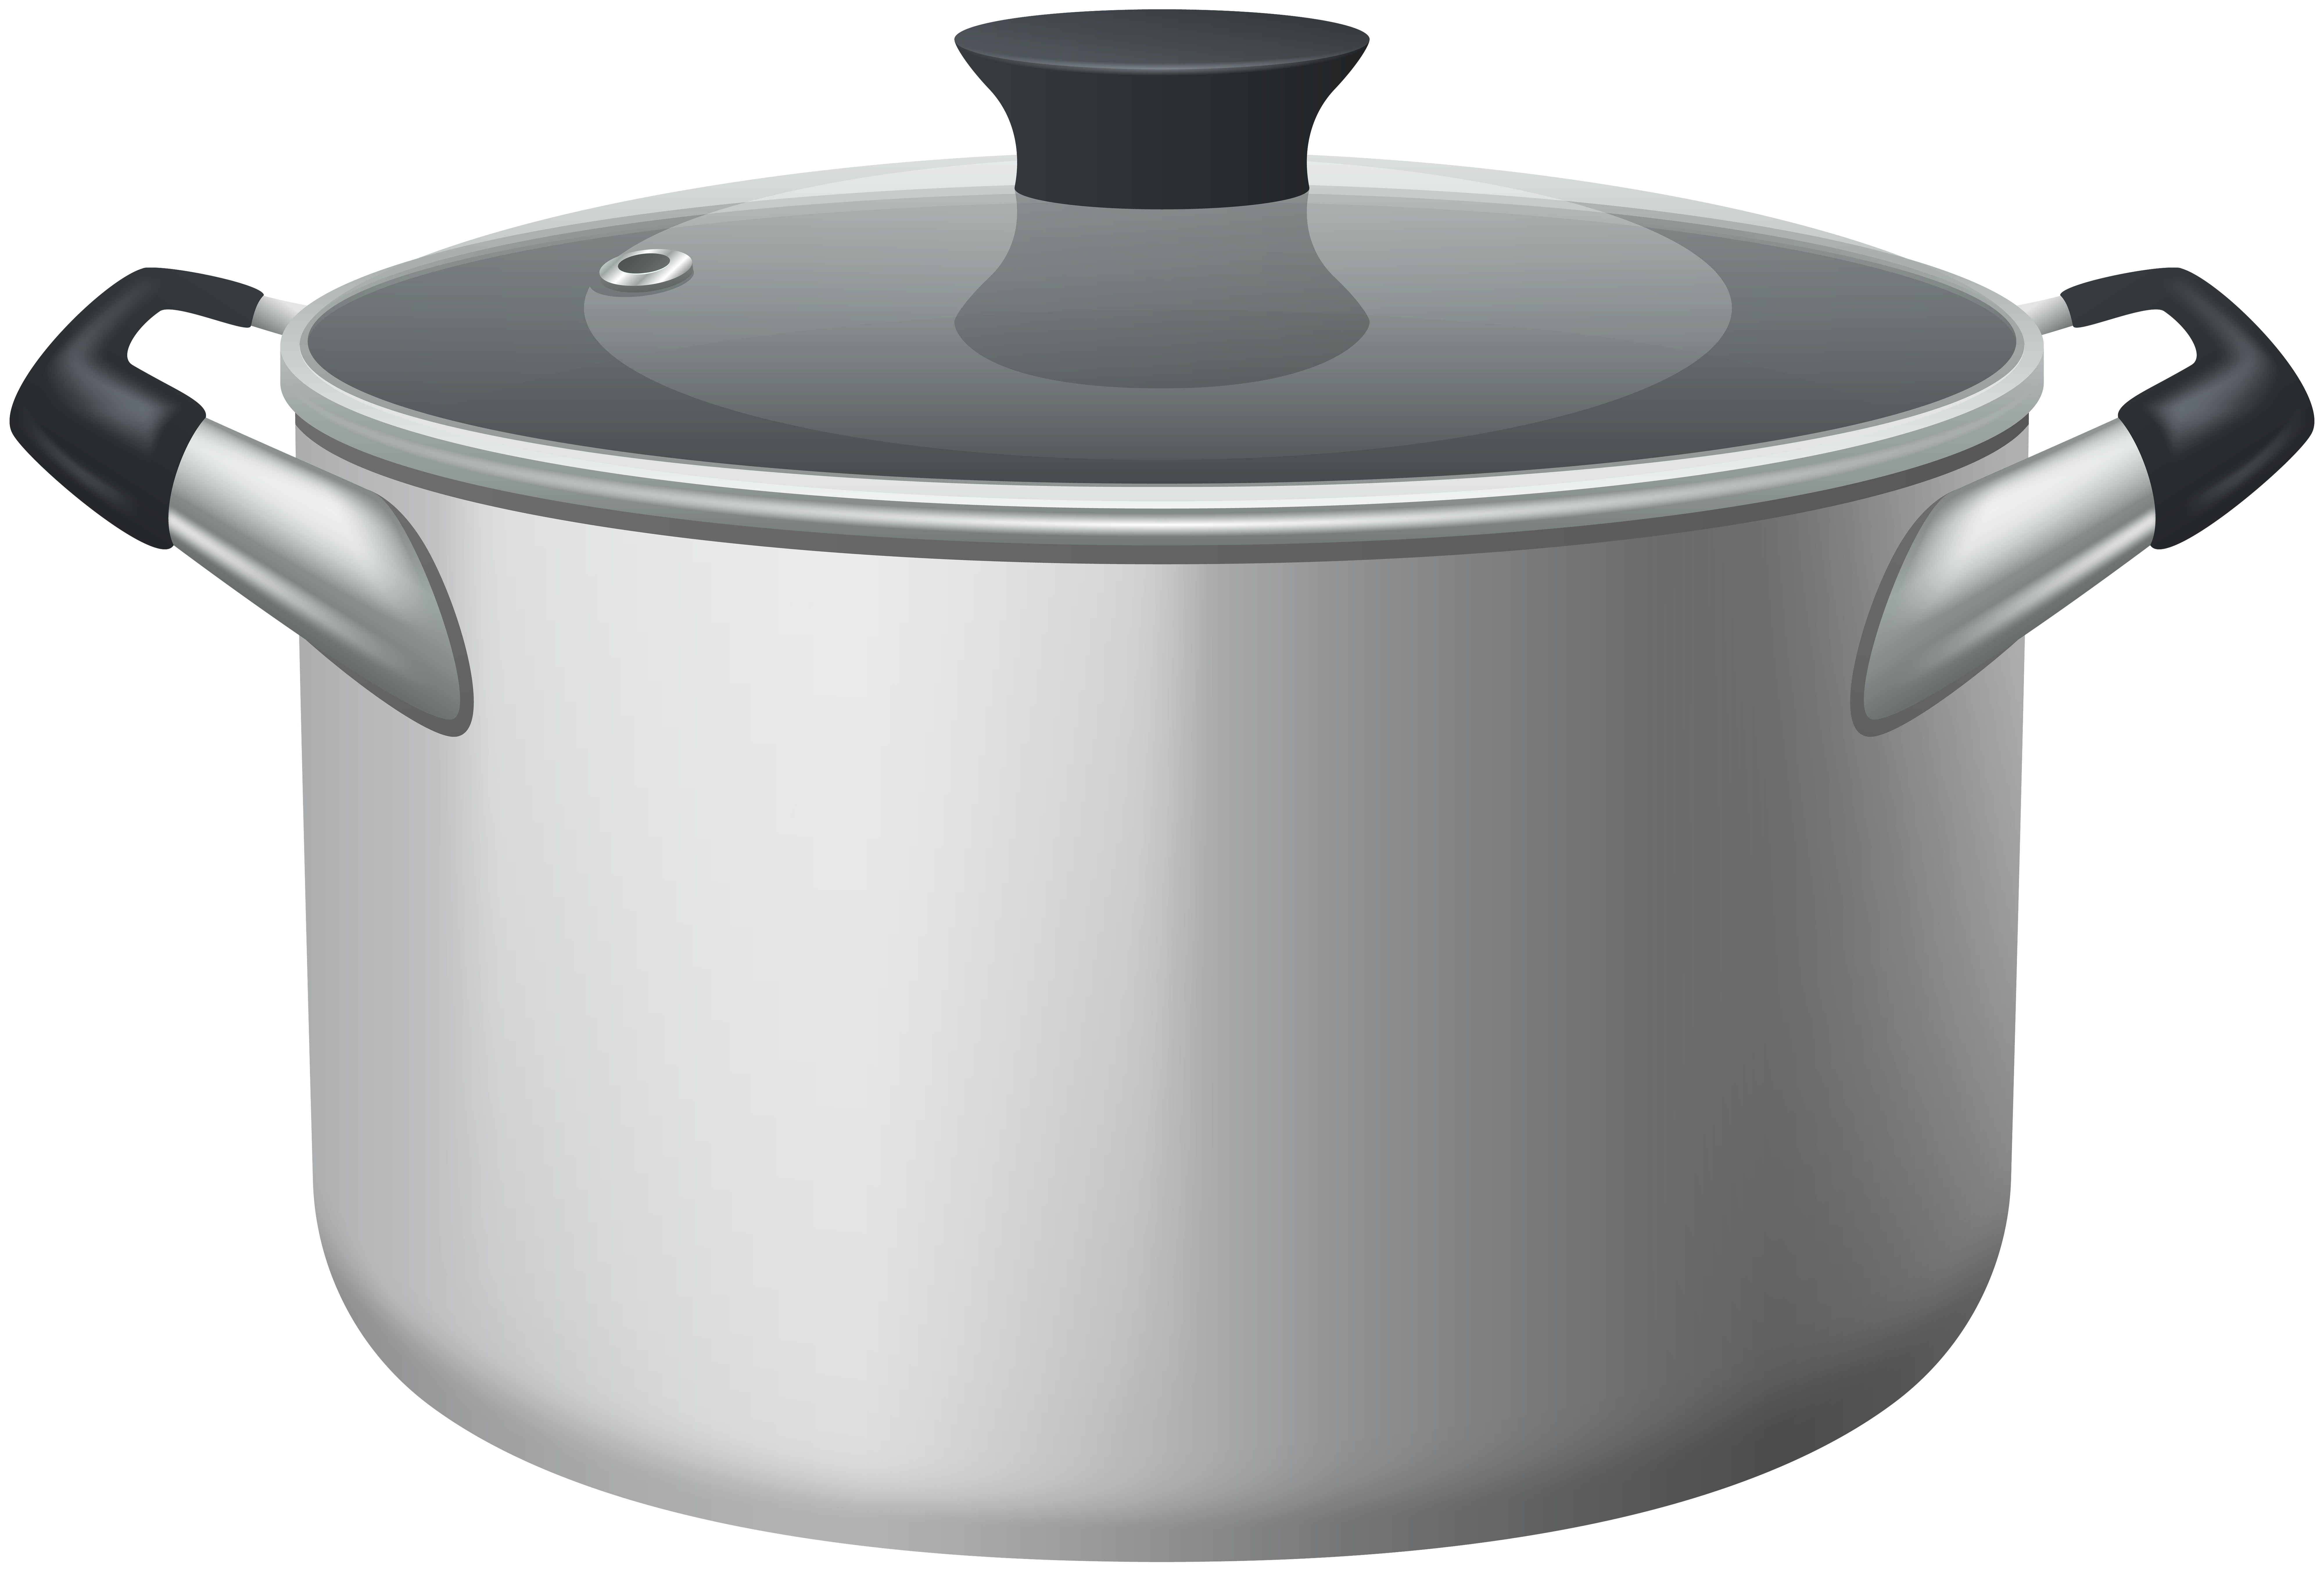 Stainless Steel Stock Pot With Glass Lid PNG Clipart.